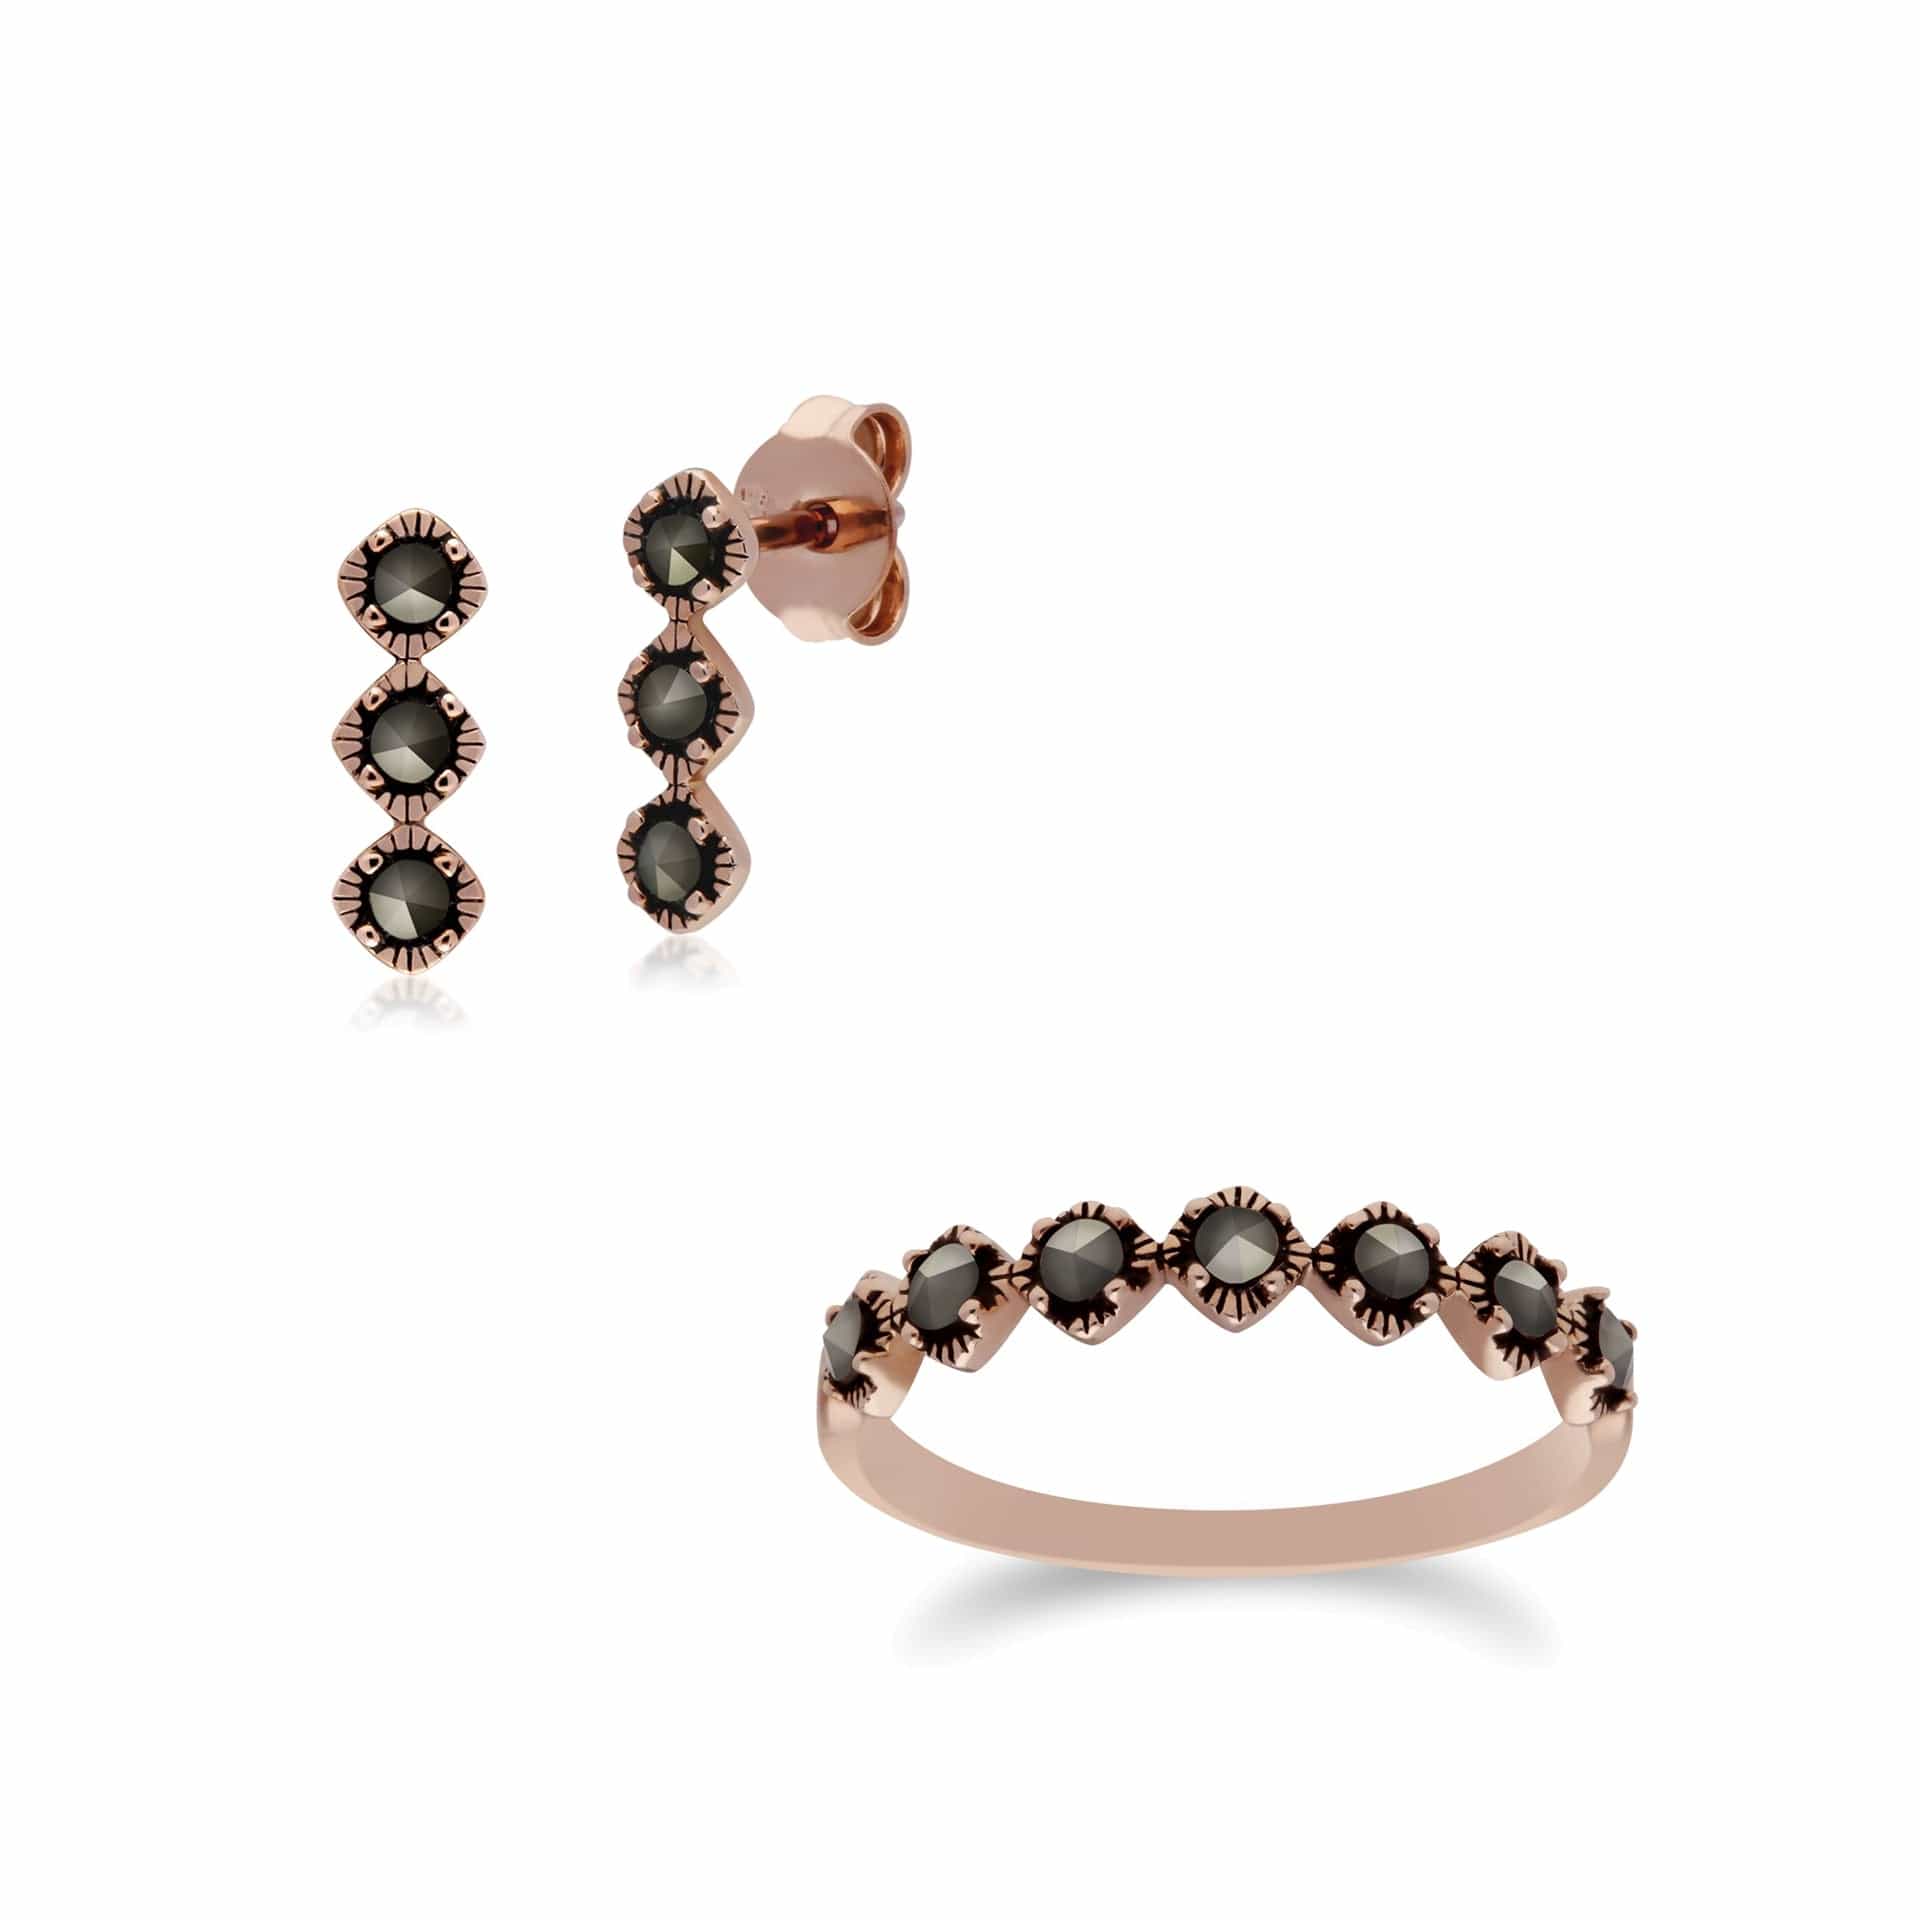 224E023101925-224R030201925 Rose Gold Plated Marcasite Triple Stone Stud Earrings & Ring Set in 925 Sterling Silver 1